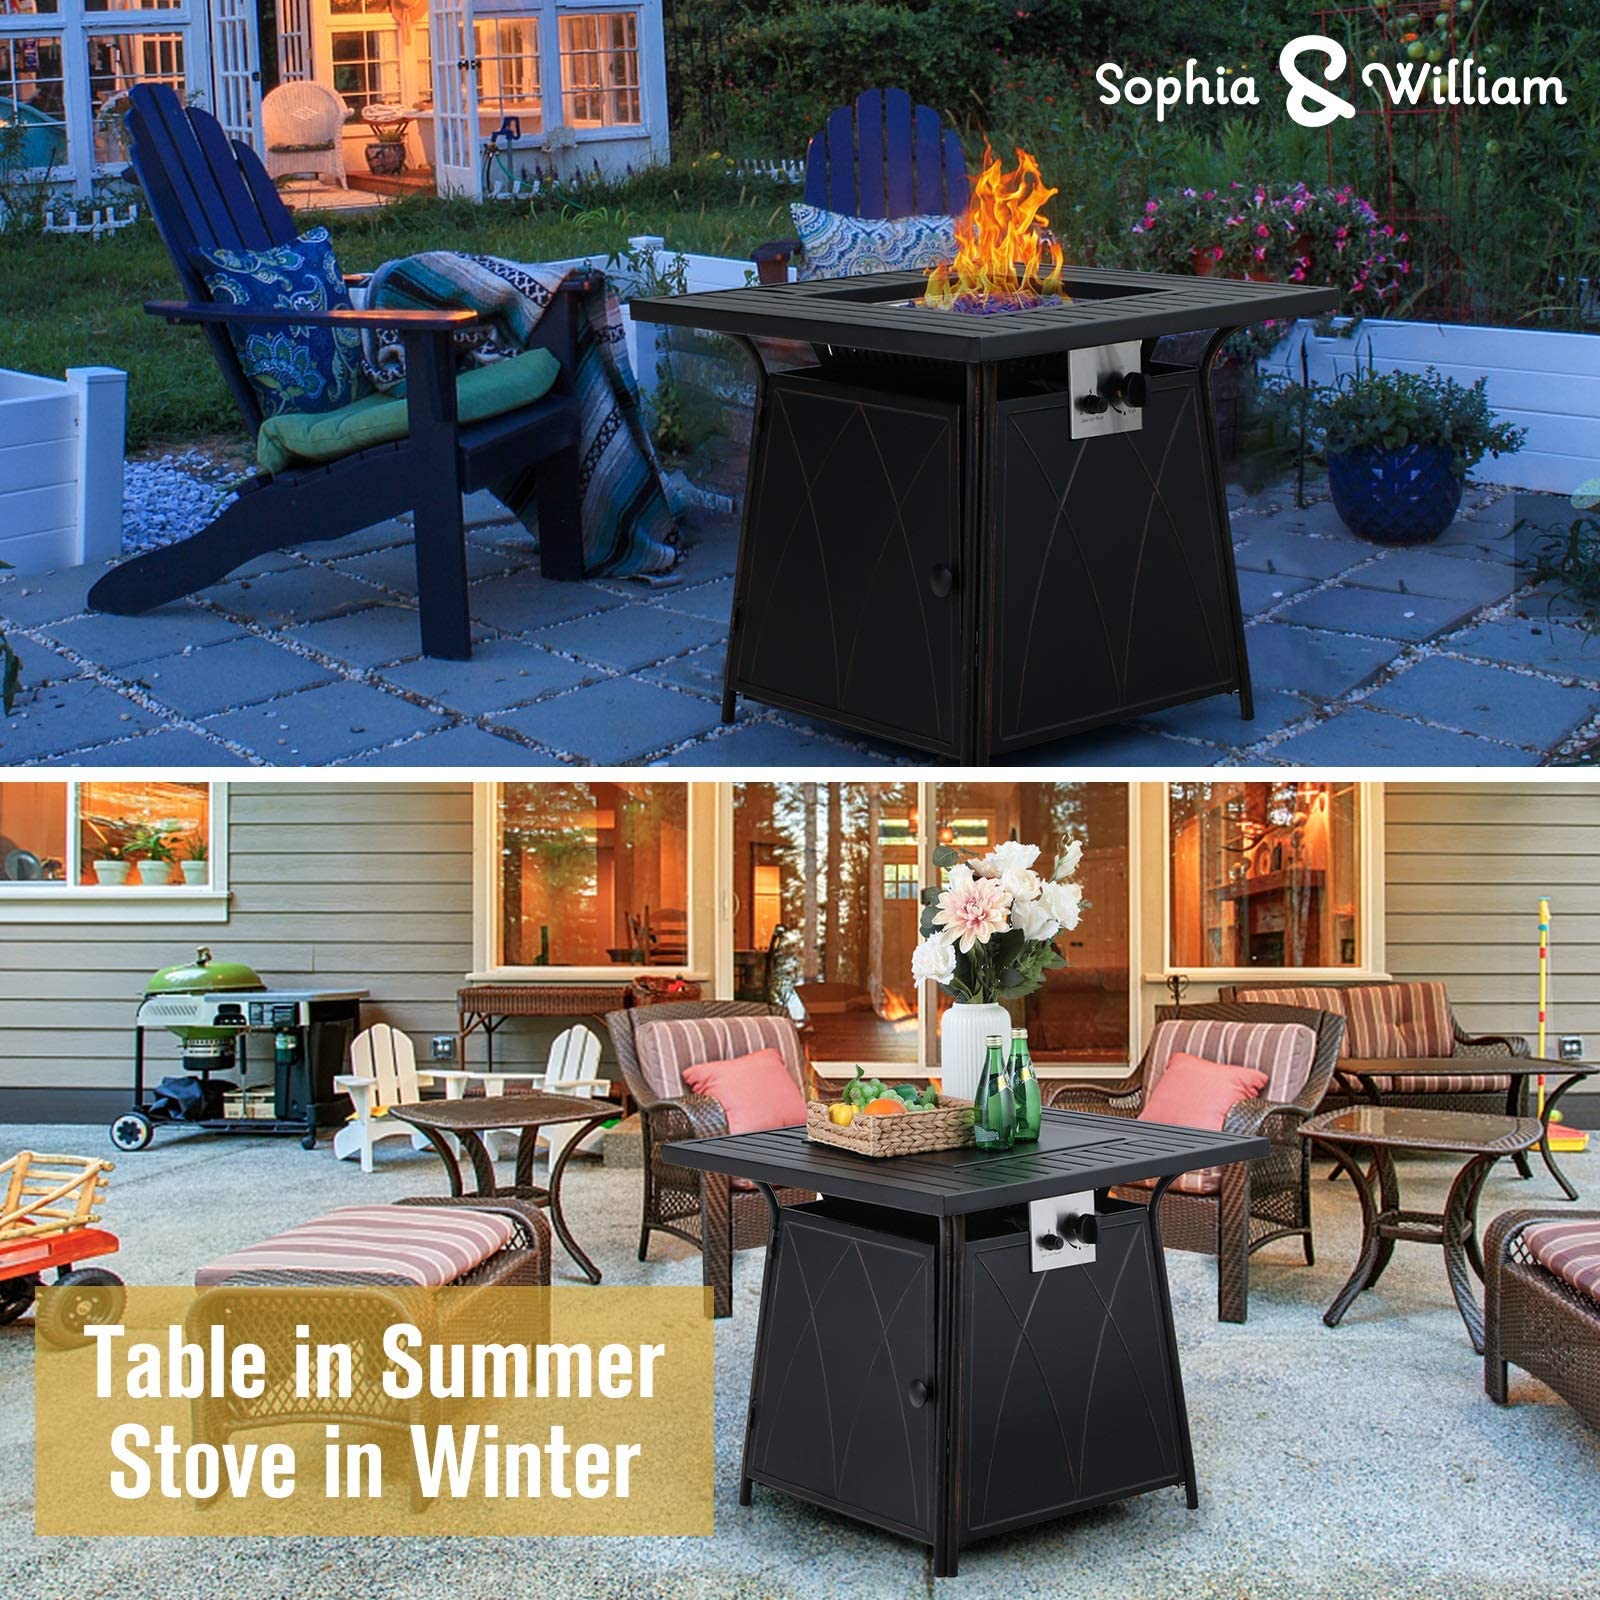 Sophia & William Gas Fire Pit Table 28 Inch 50,000BTU Square Outdoor Propane FirePits 2 in 1 Auto-Ignition Patio Fireplace for Outside with Lid and Blue Fire Glass, Black